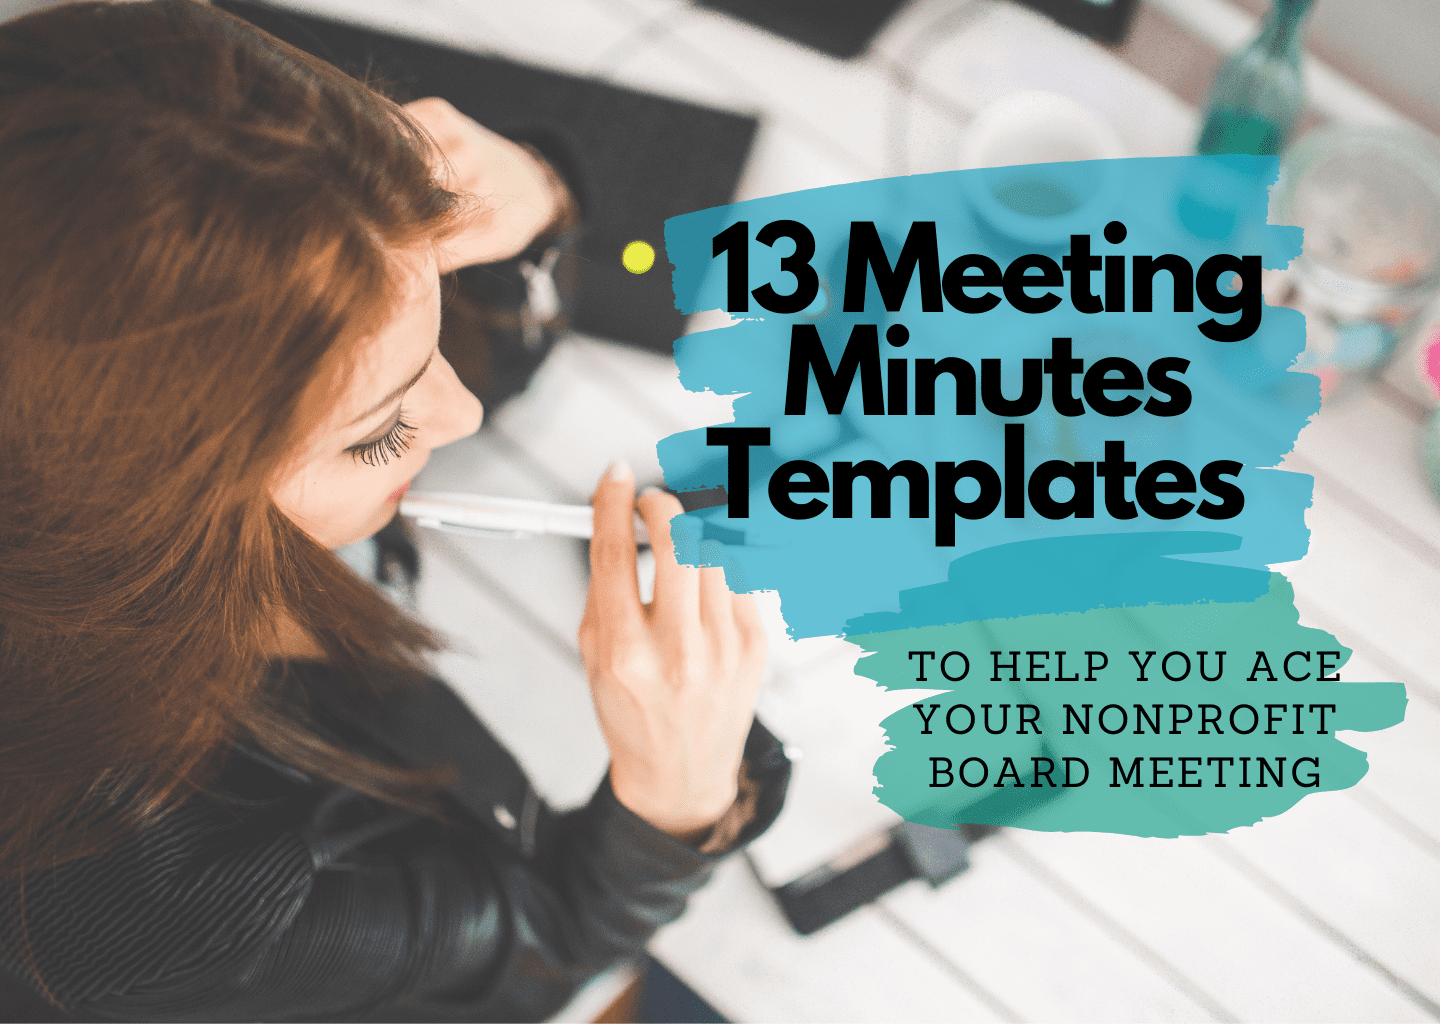 13 Meeting Minutes Templates for More Productive Nonprofit Board Meetings